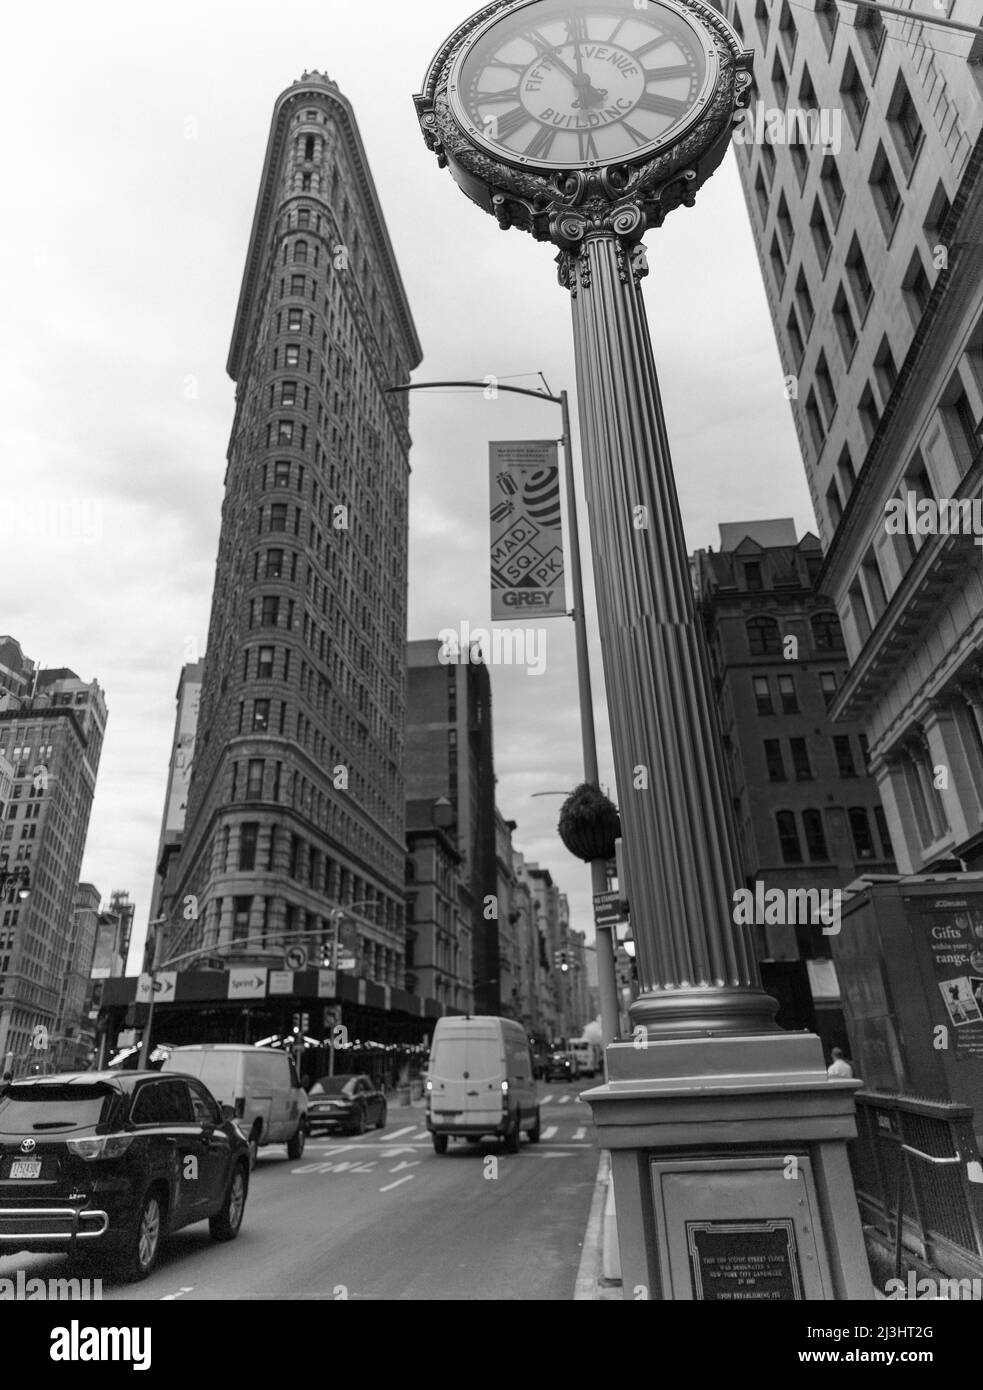 23 Street, New York City, NY, USA, Historic Flatiron or Fuller Building, a 22 Story triangular shaped steel framed Landmark, built in 1902 and considered as one of the first skyscrapers ever built and one of New York's famous sidewalk clocks Stock Photo